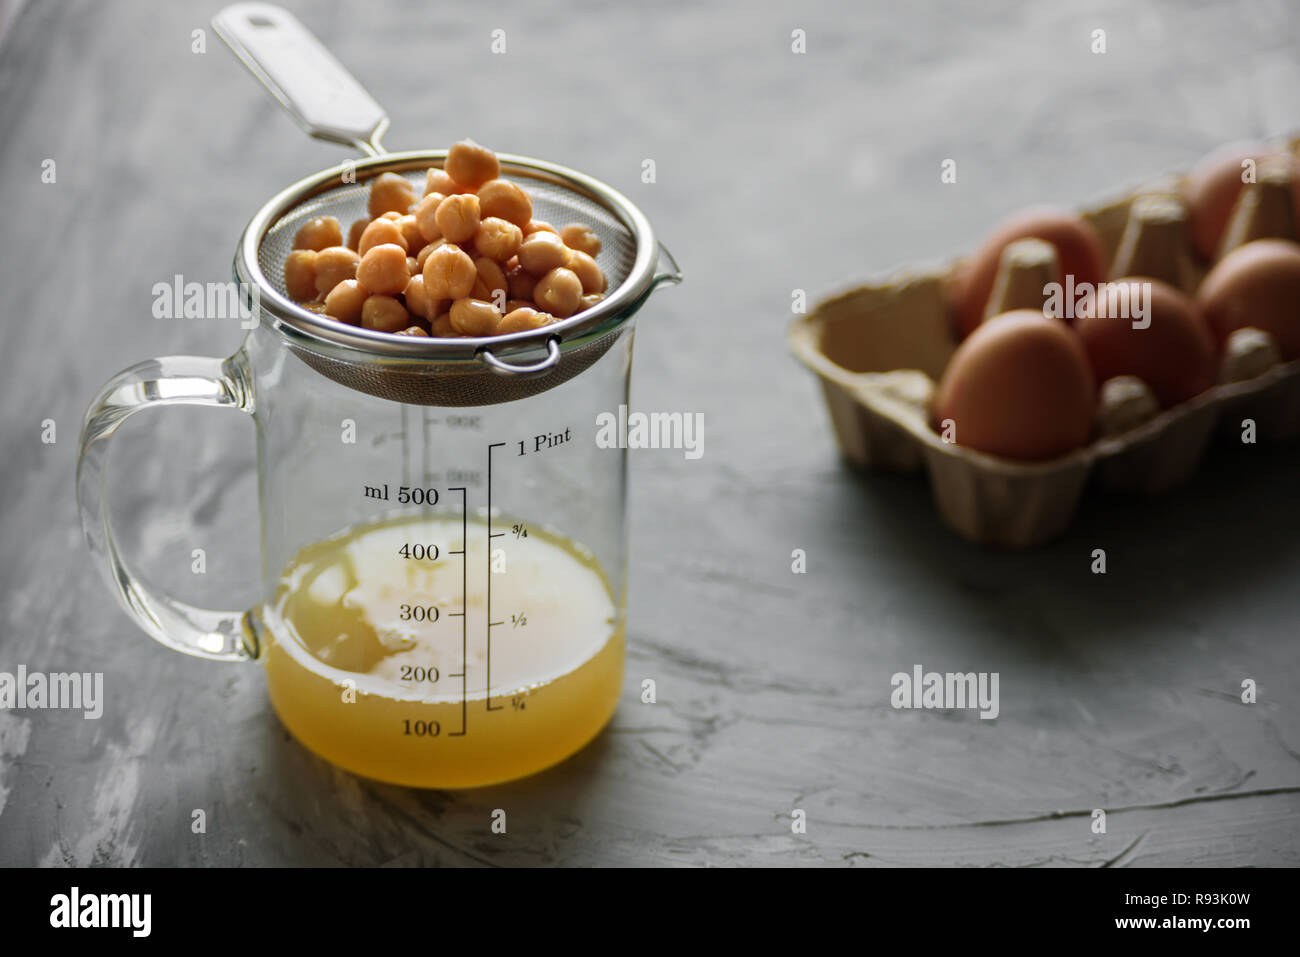 Chickpea Water Aquafaba With Eggs Egg Replacement Vegan Concept Stock Photo Alamy